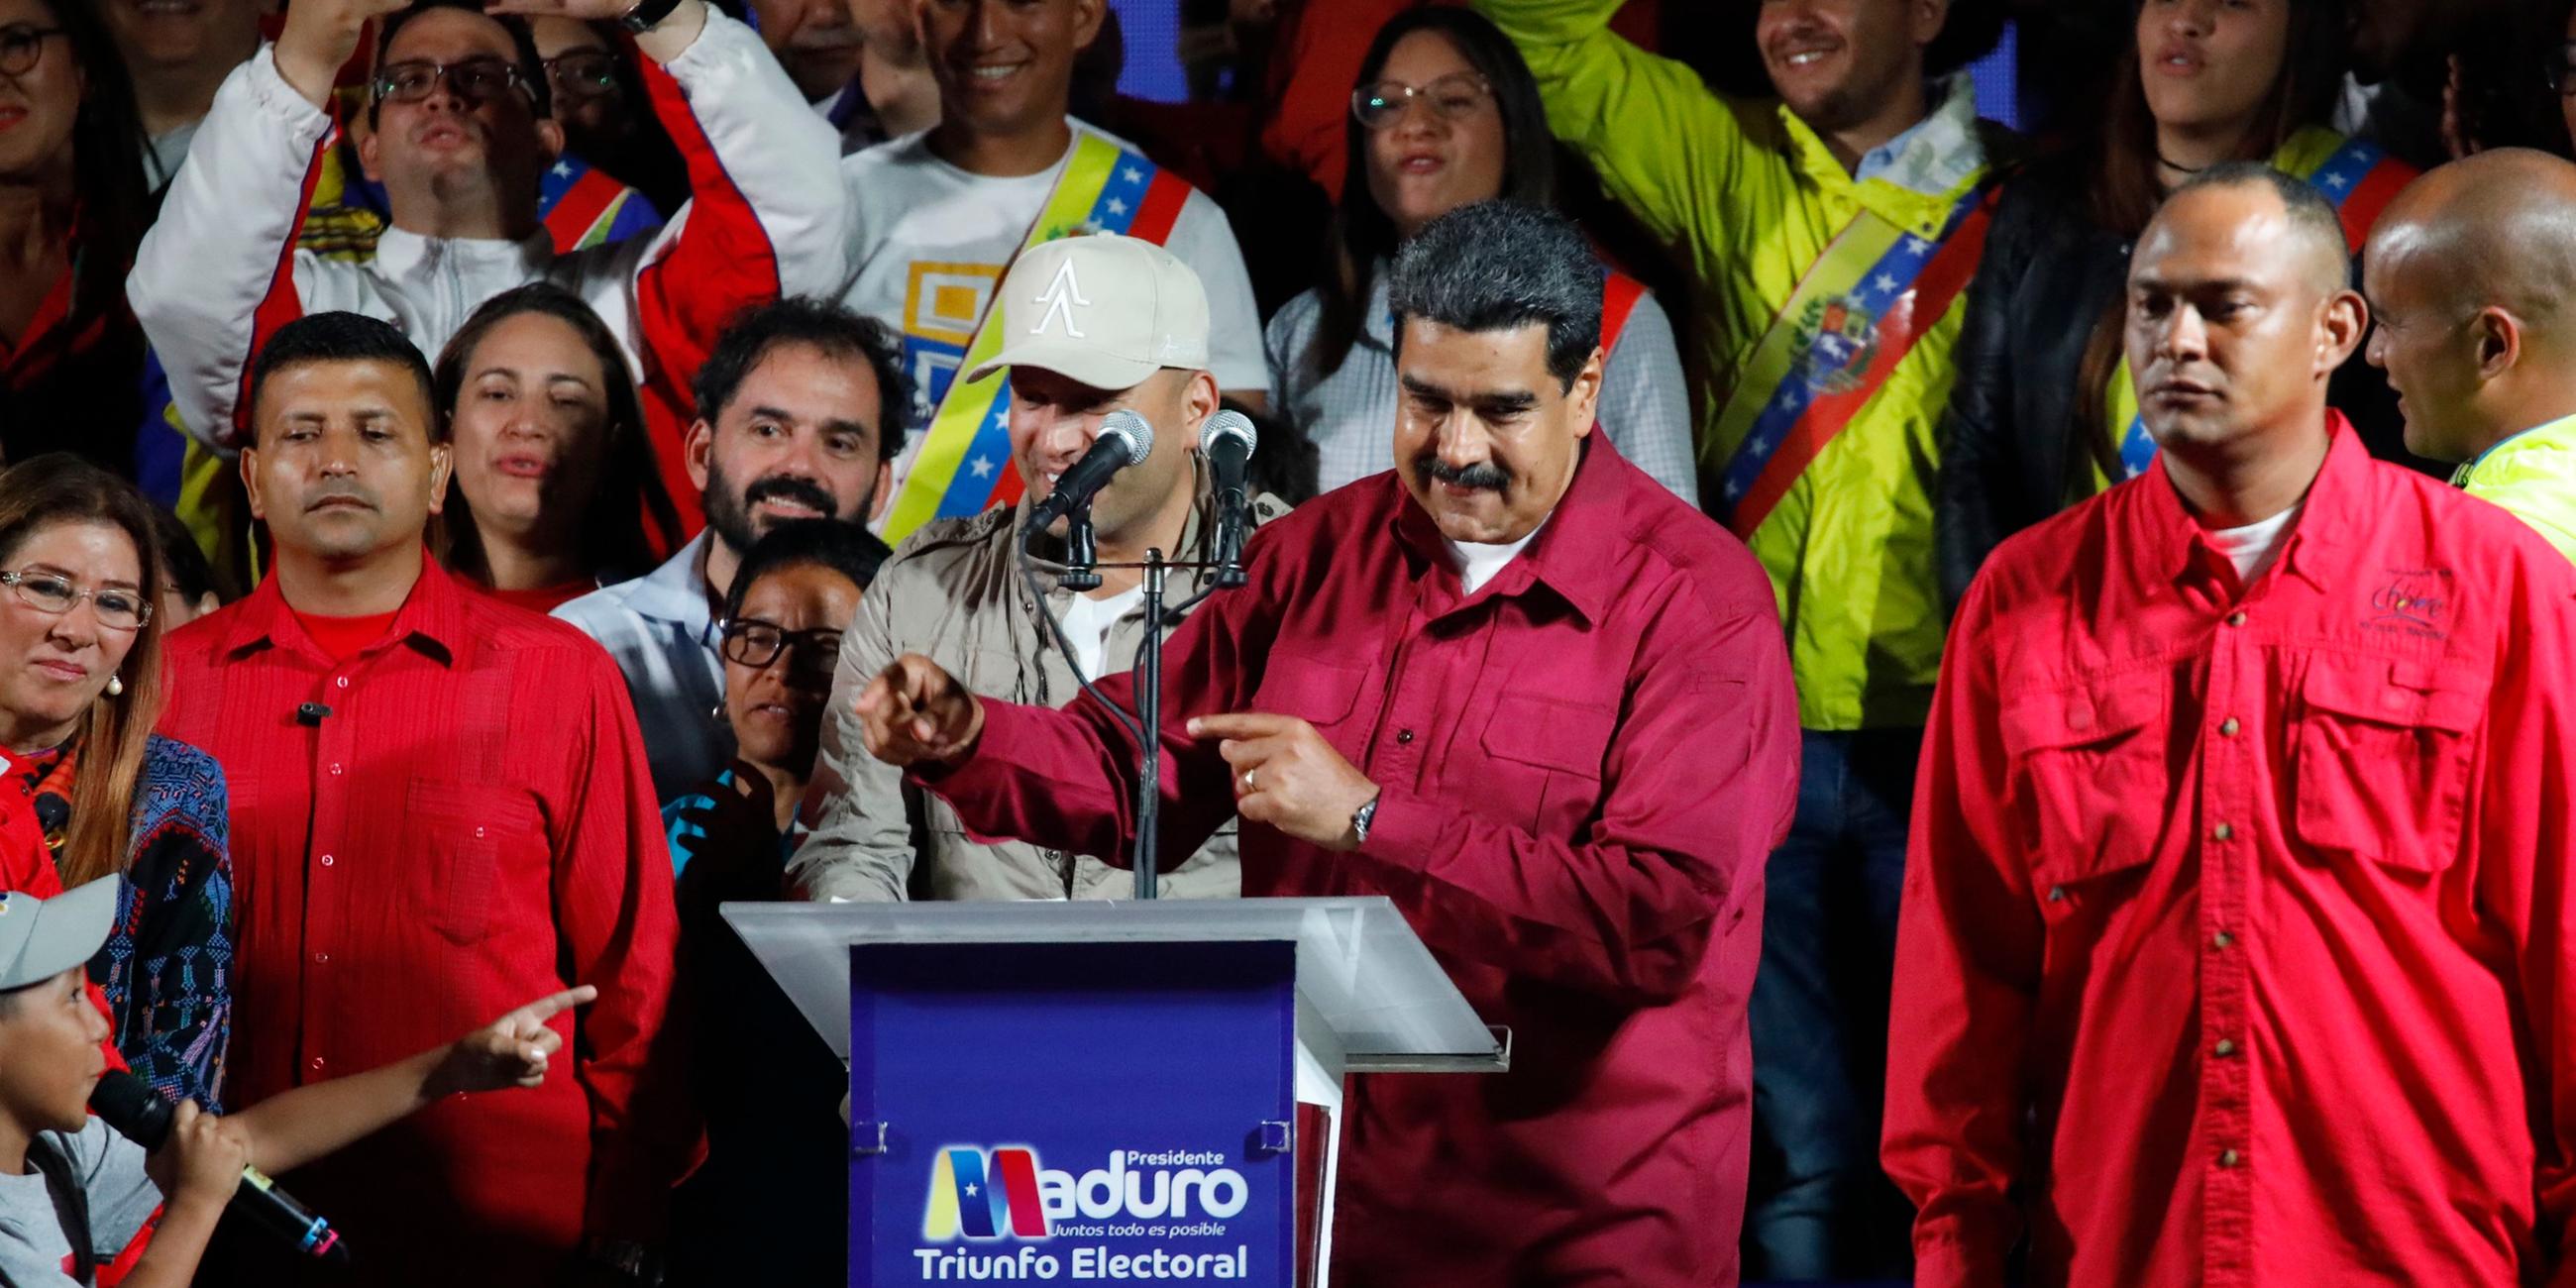 venezuela's president maduro stands with supporters after the results of the election were released in caracas